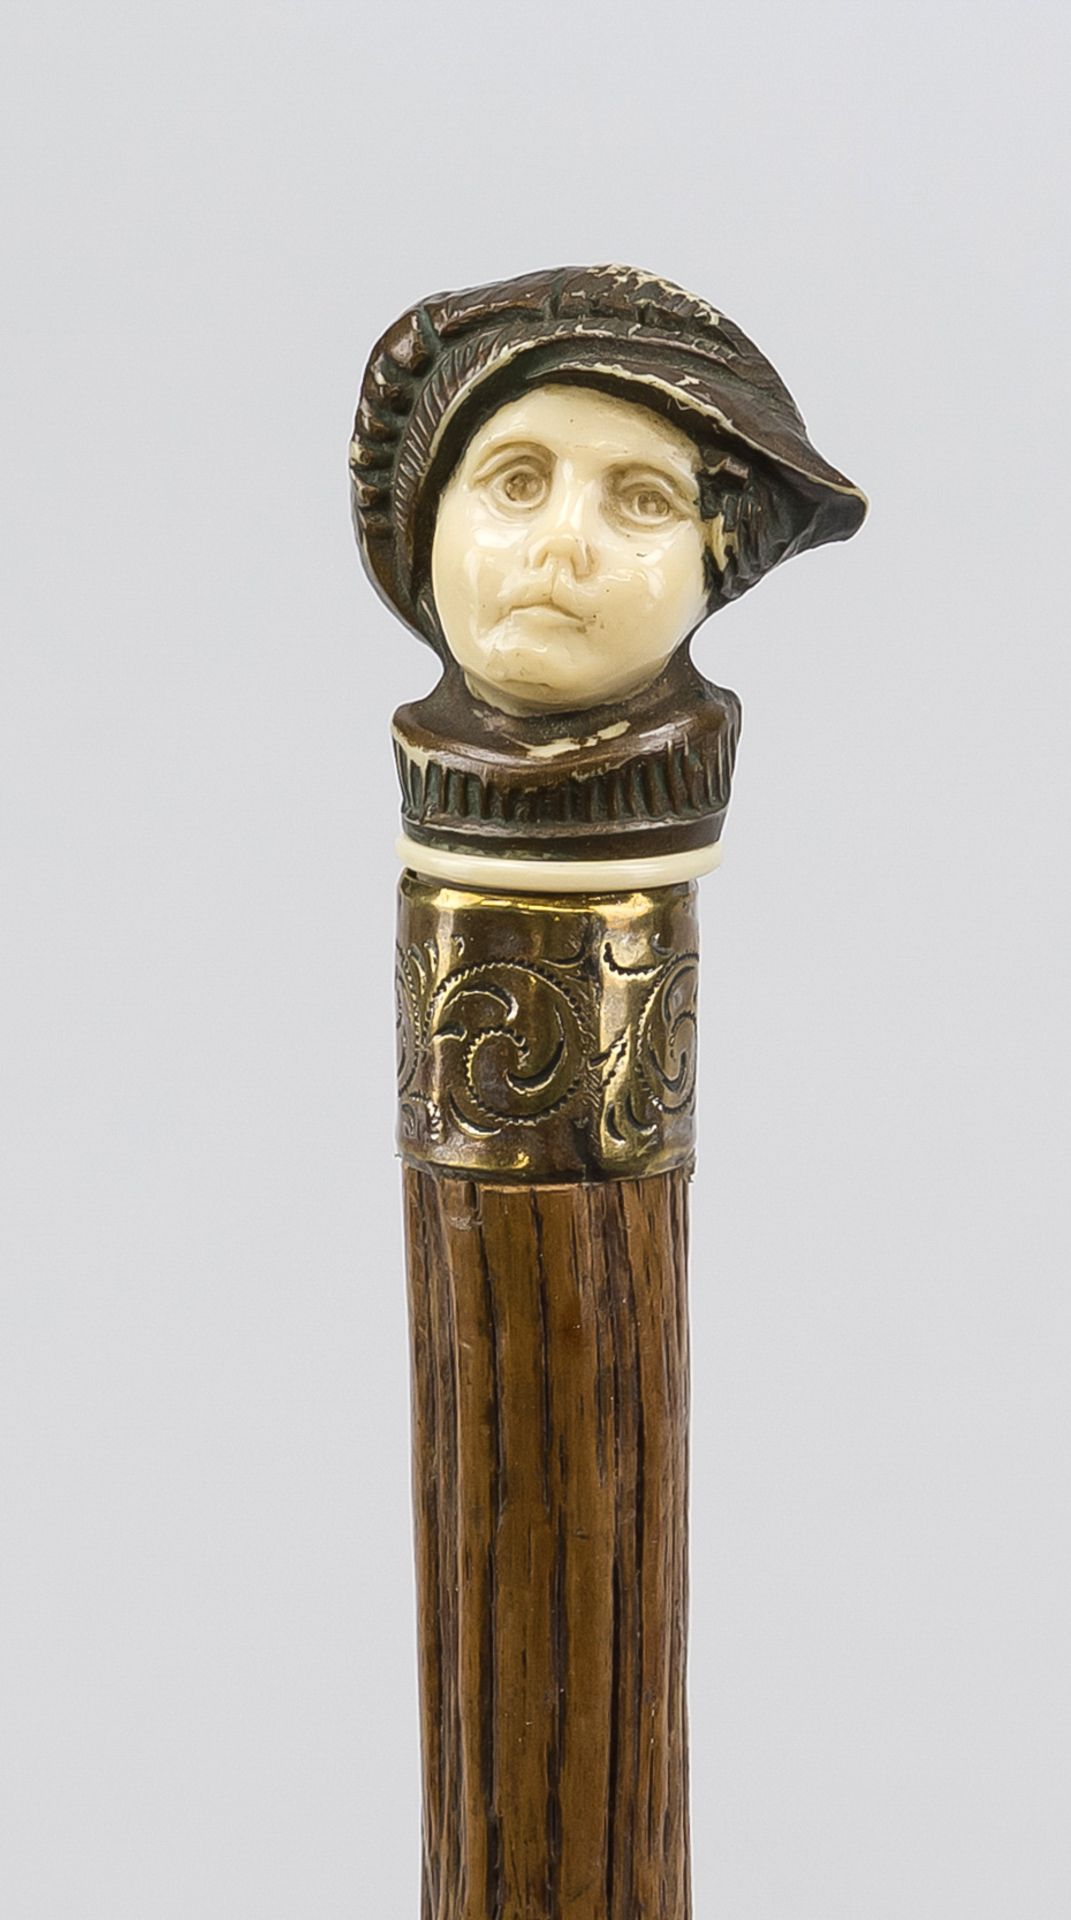 Walking stick with figural pommel, probably late 19th century, slender, natural shaft of dark